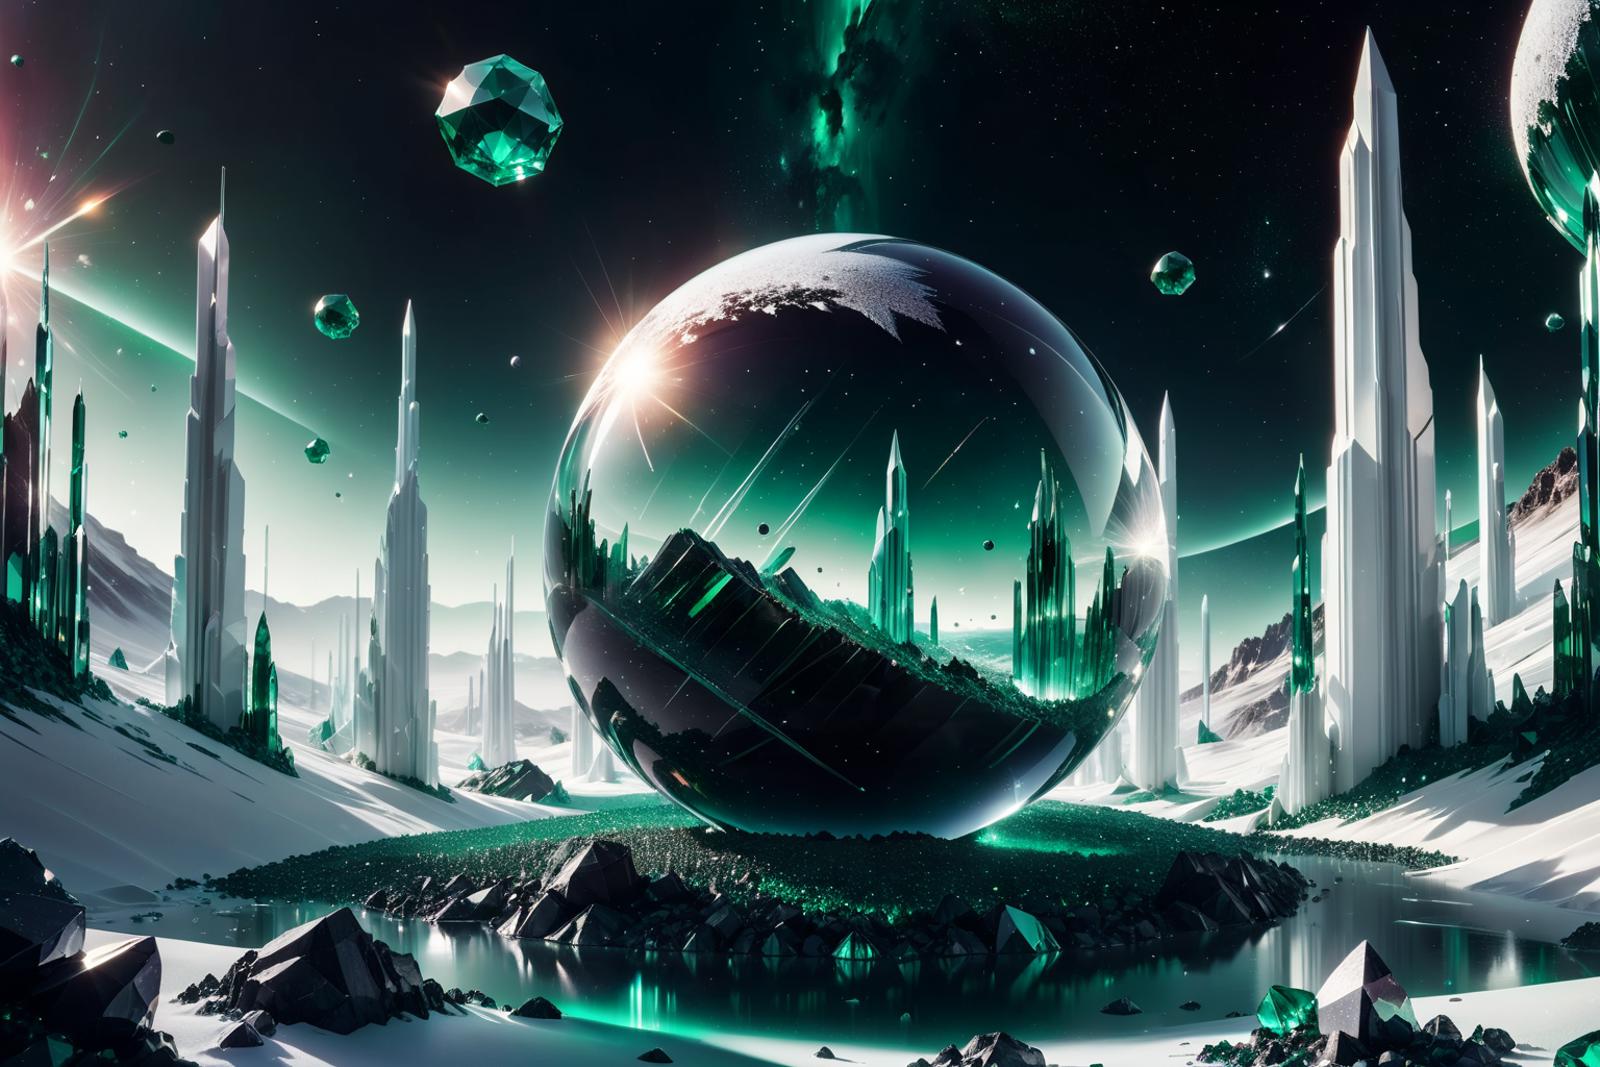 An artistic computer generated image of a large sphere surrounded by green and white objects.